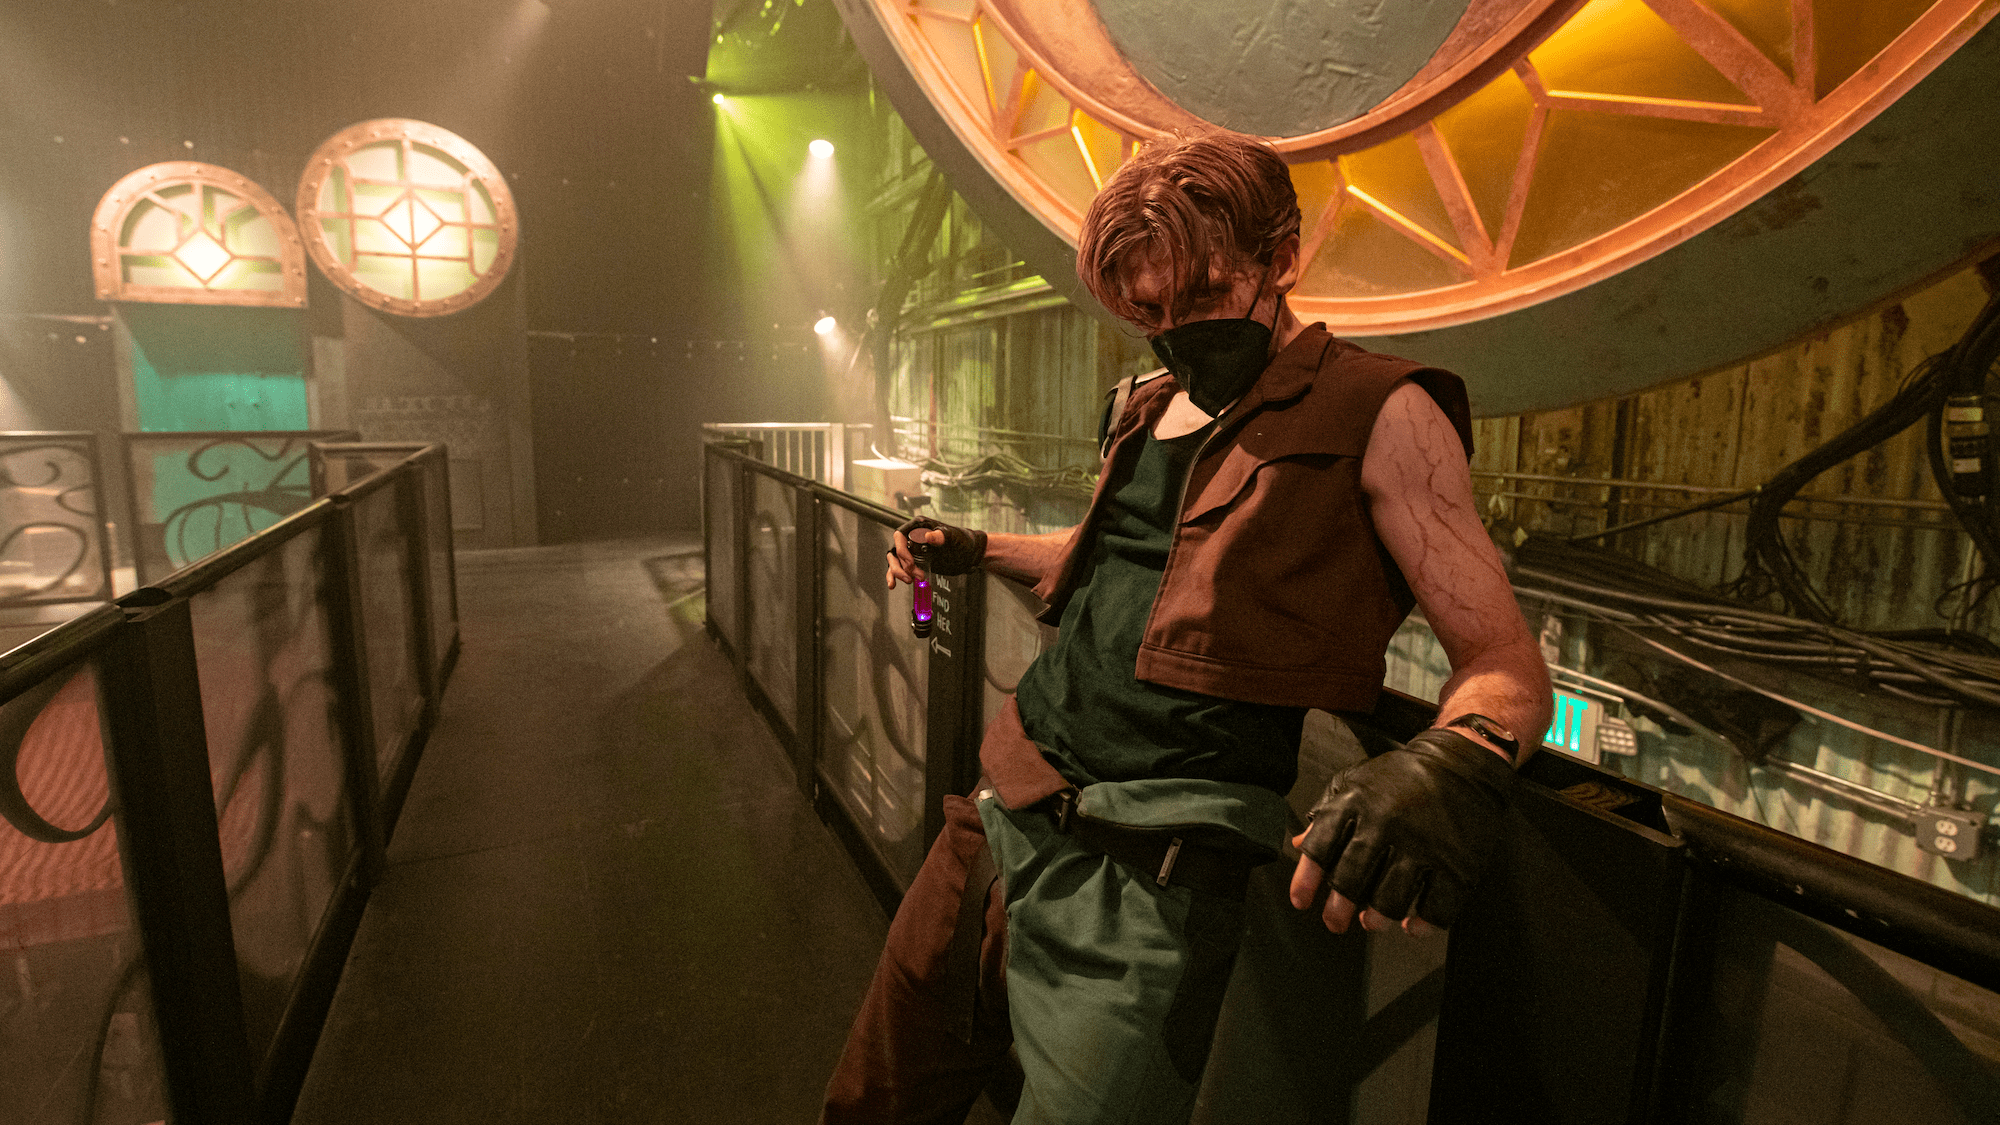 An actor's portrayal of Deckard from "Arcane" in Piltover's undercity.